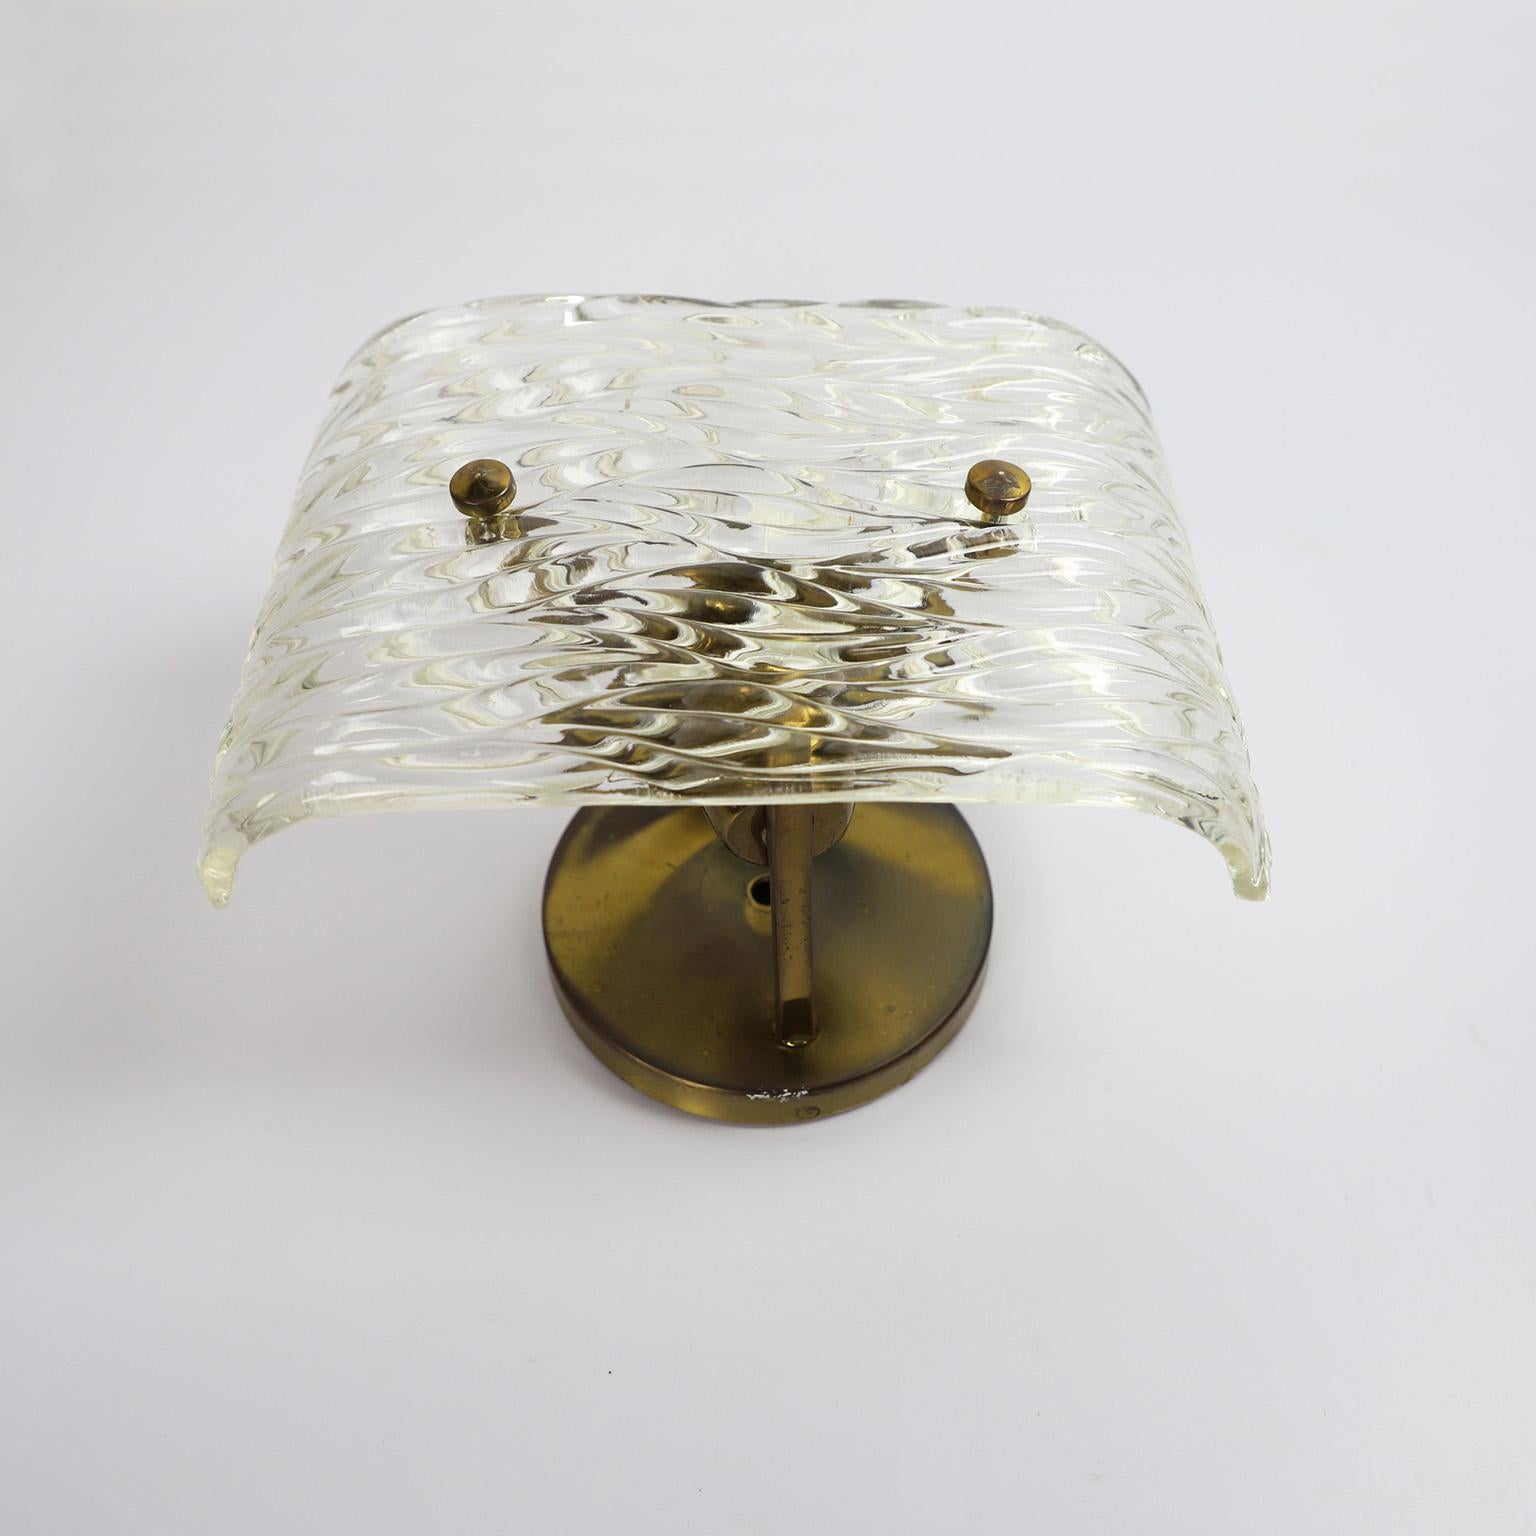 Circa 1970. We offer this beautiful Antique Wall Sconce.